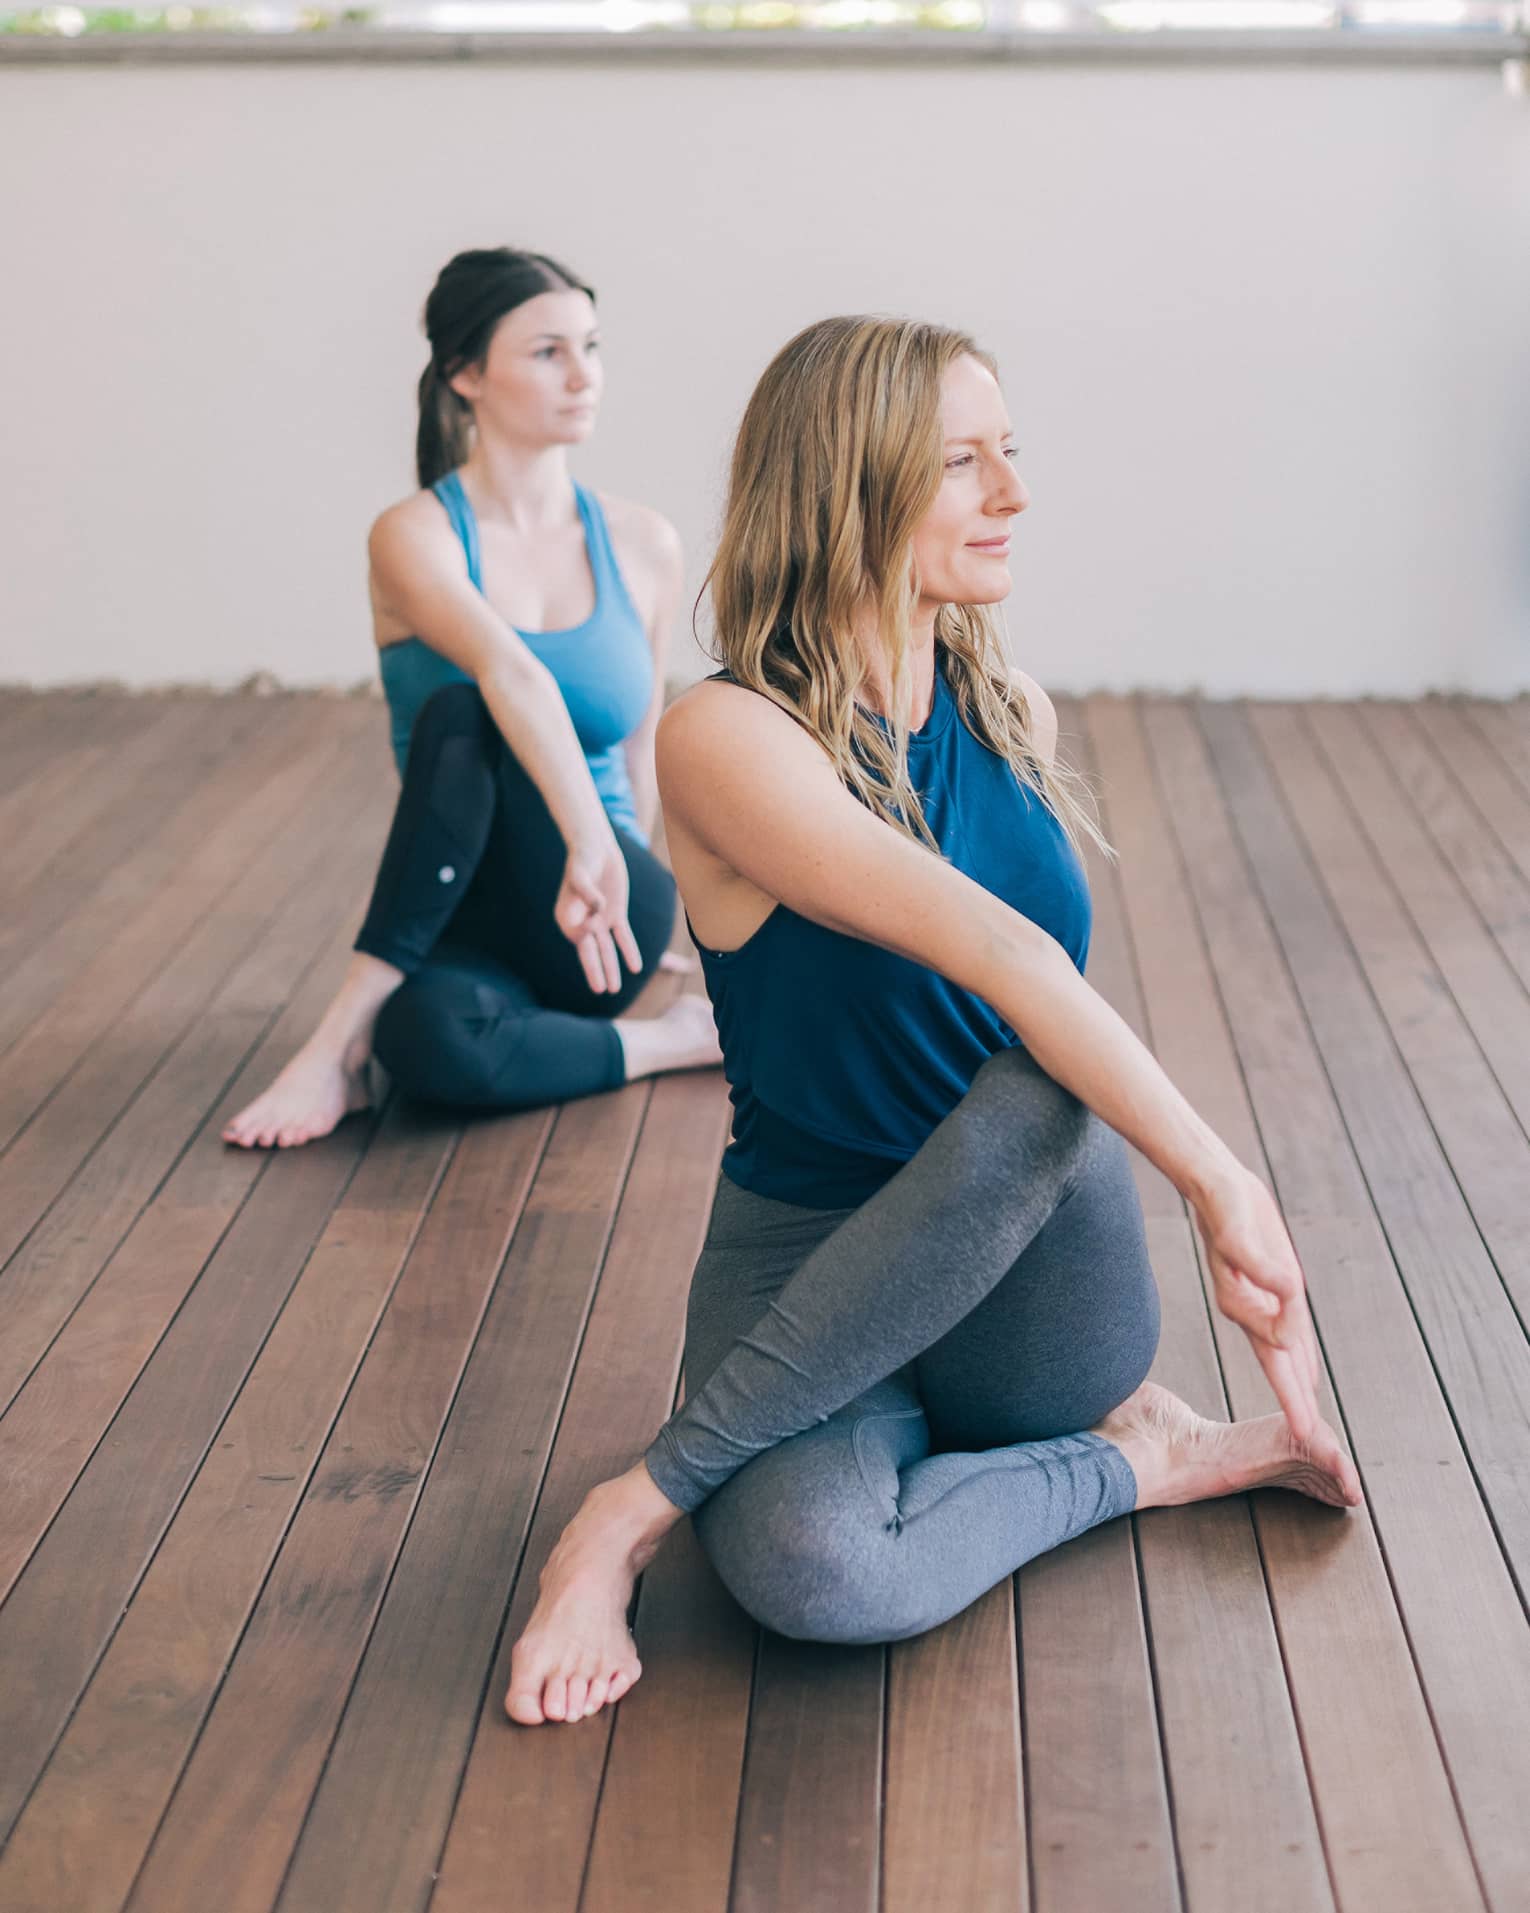 One blonde woman and one brunette woman sit with one leg crossed over the other with their bodies turned to one side and their front hands forming a lam mudra